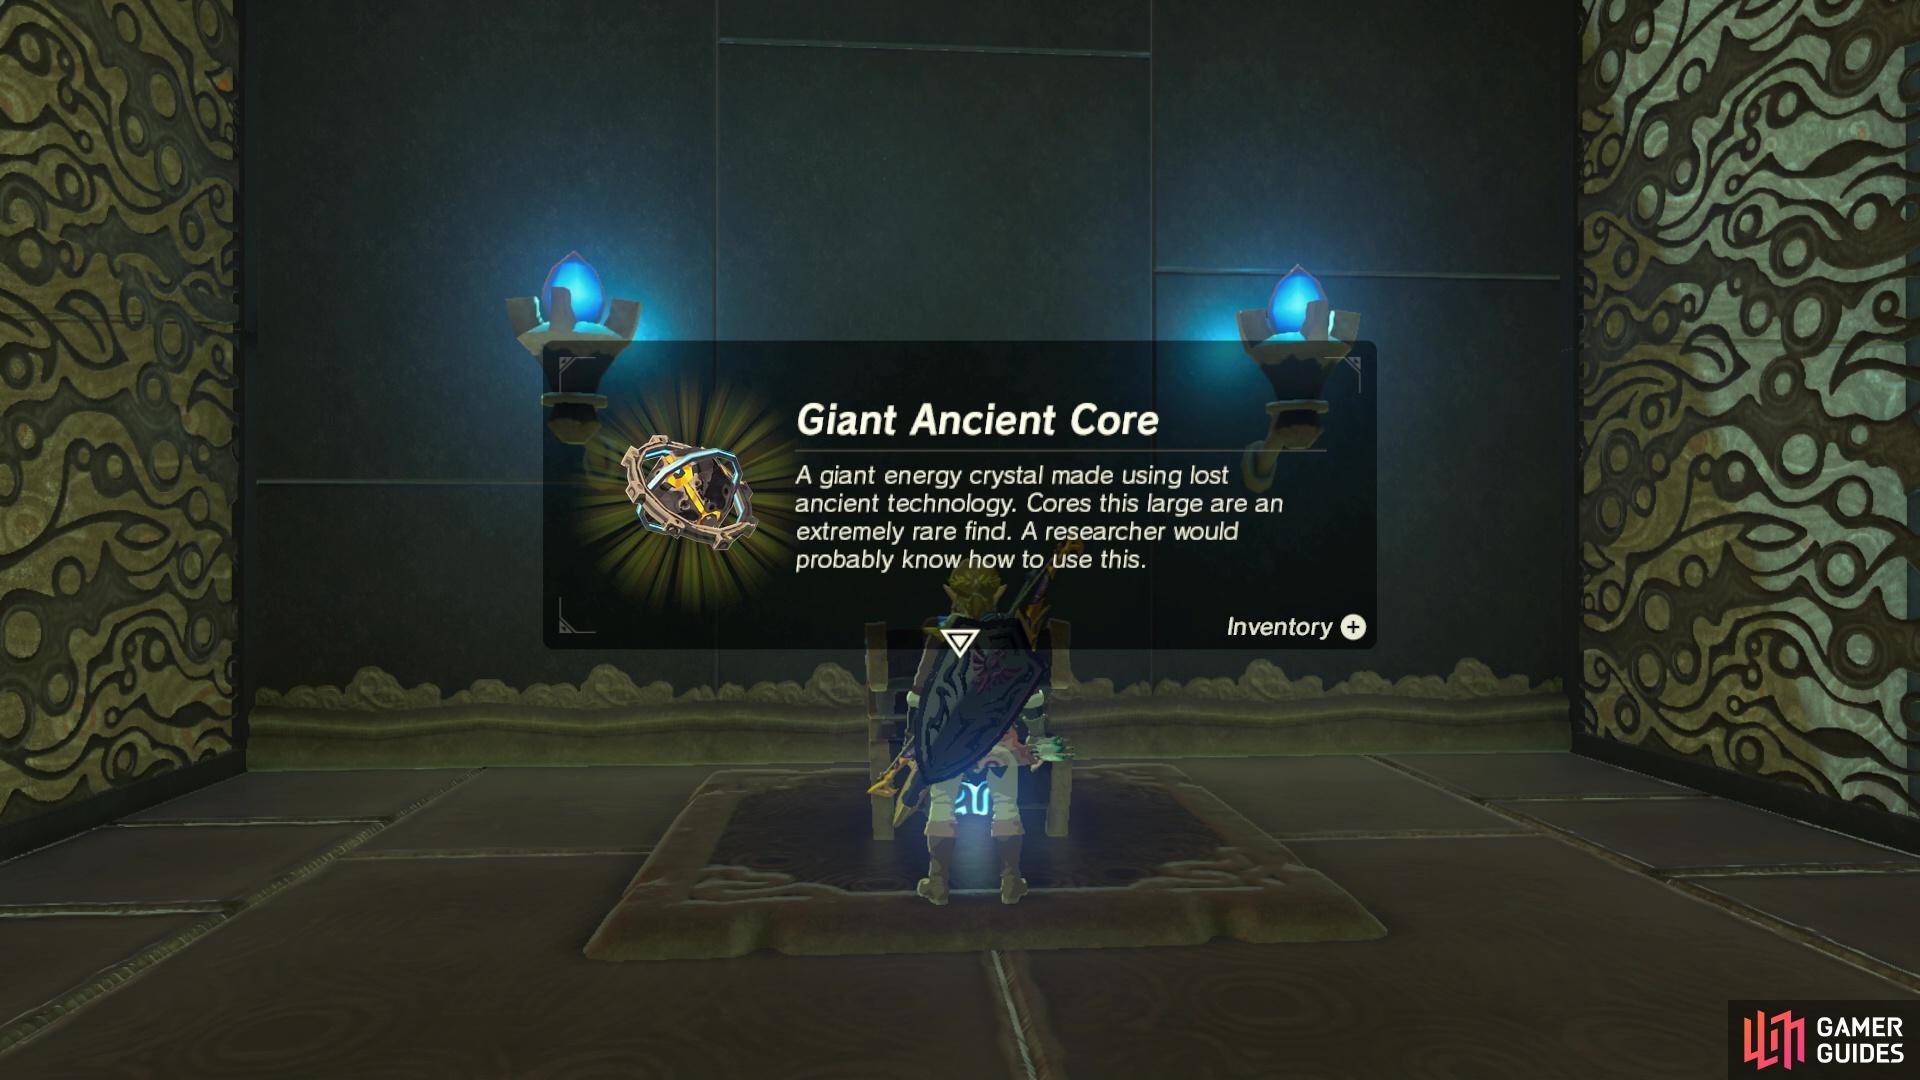 For completing this optional puzzle, you'll earn a Giant Ancient Core.